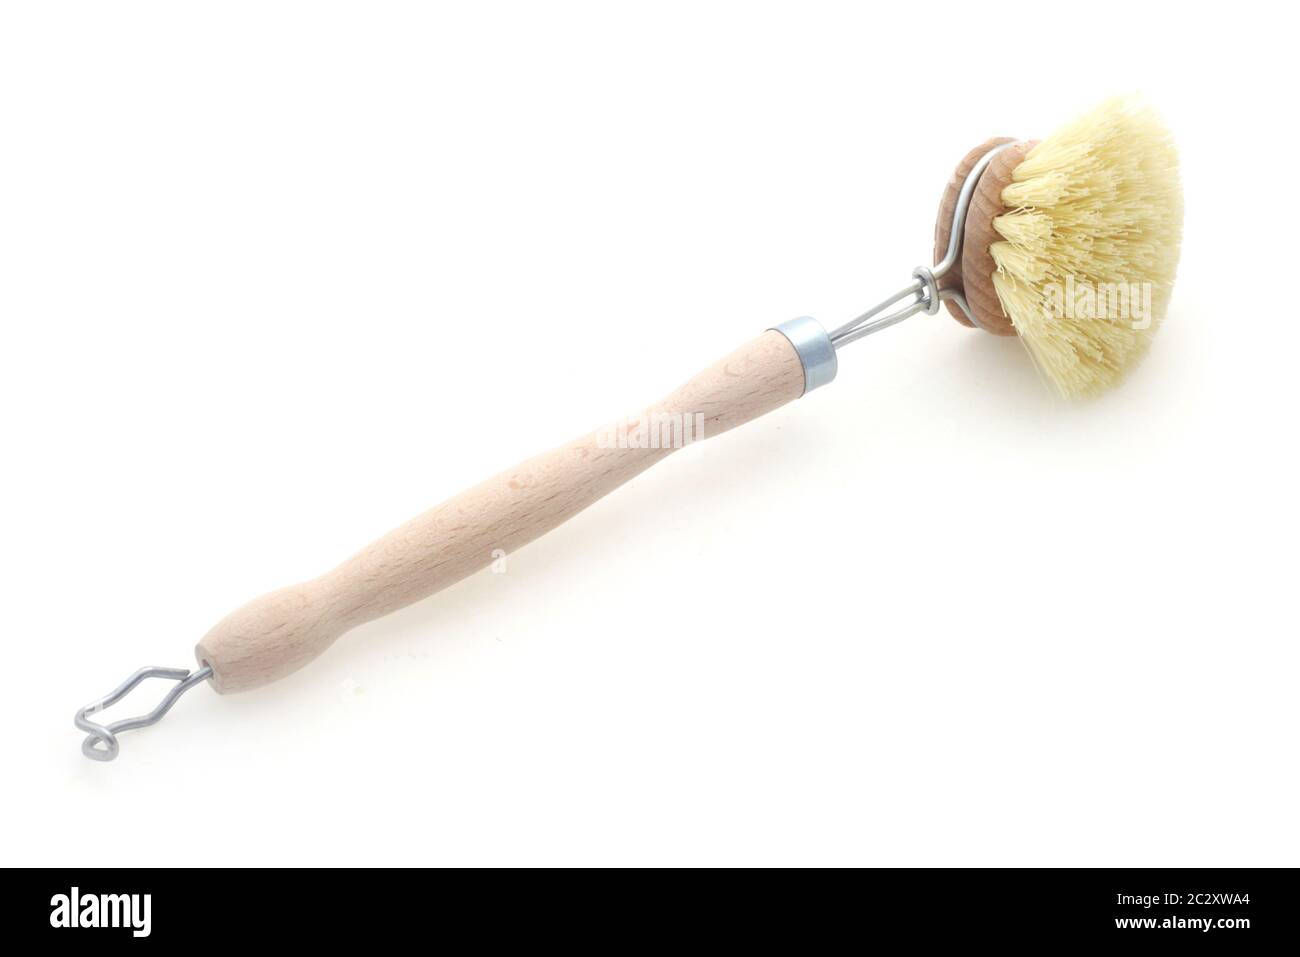 Washing Up Brush High Resolution Stock Photography and Images - Alamy